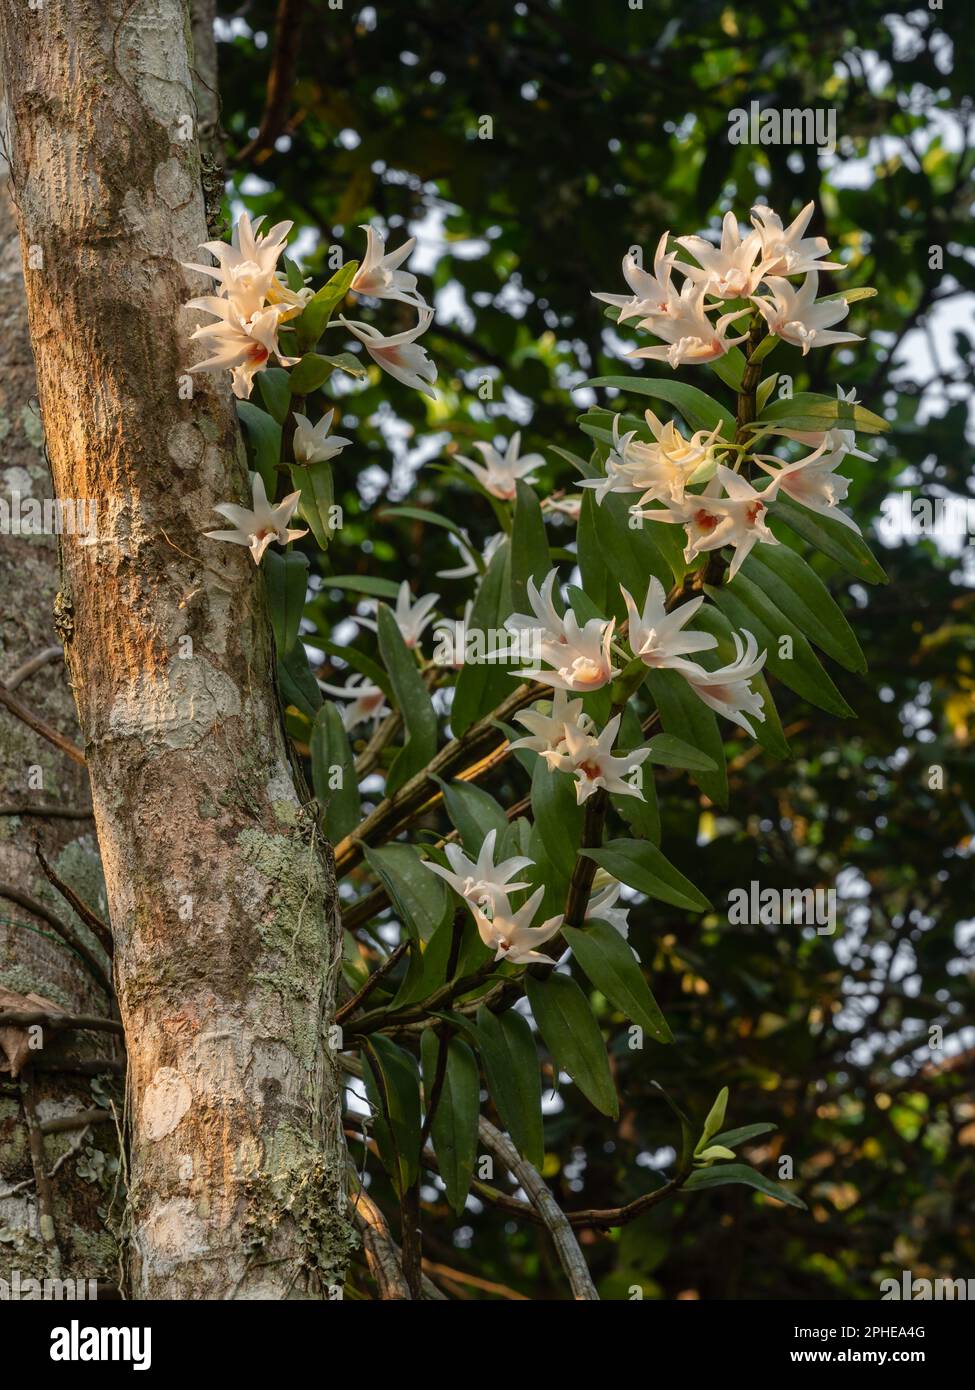 Vertical view of beautiful white and orange red dendrobium draconis epiphytic orchid species blooming on tree in tropical garden Stock Photo